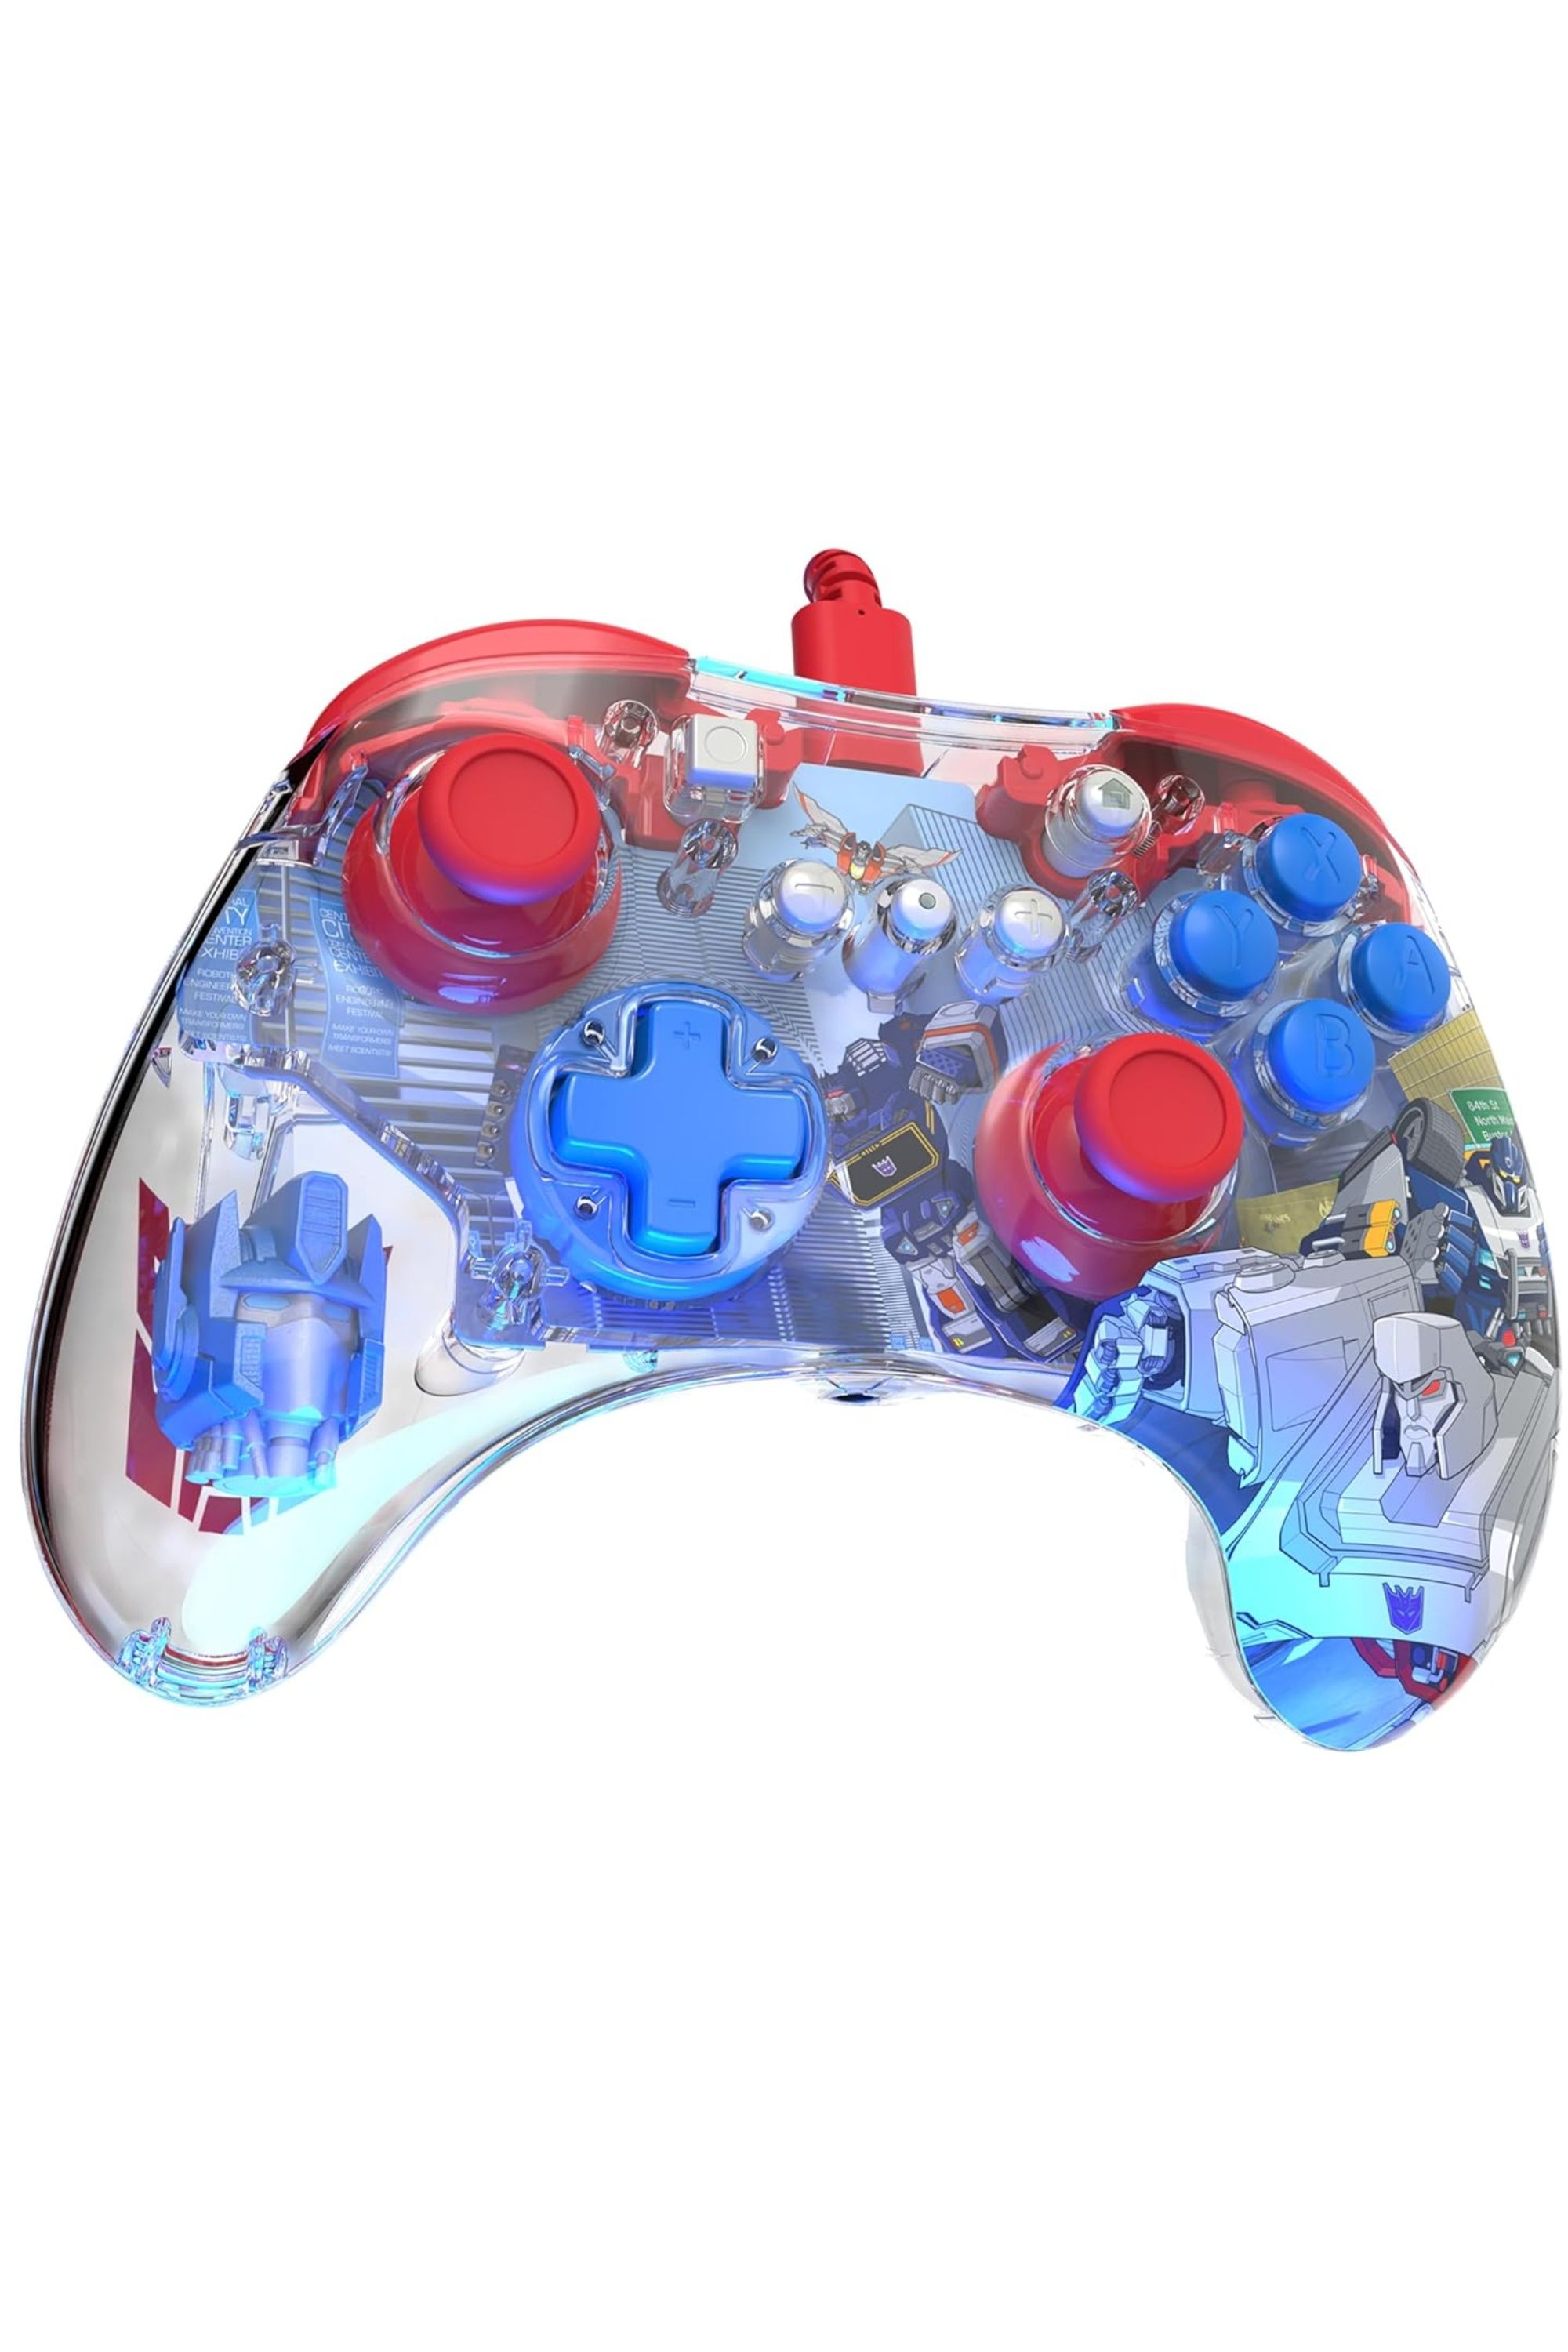 PDP's Realmz Transformers Controller With An Optimus Prime Inside Available  Now